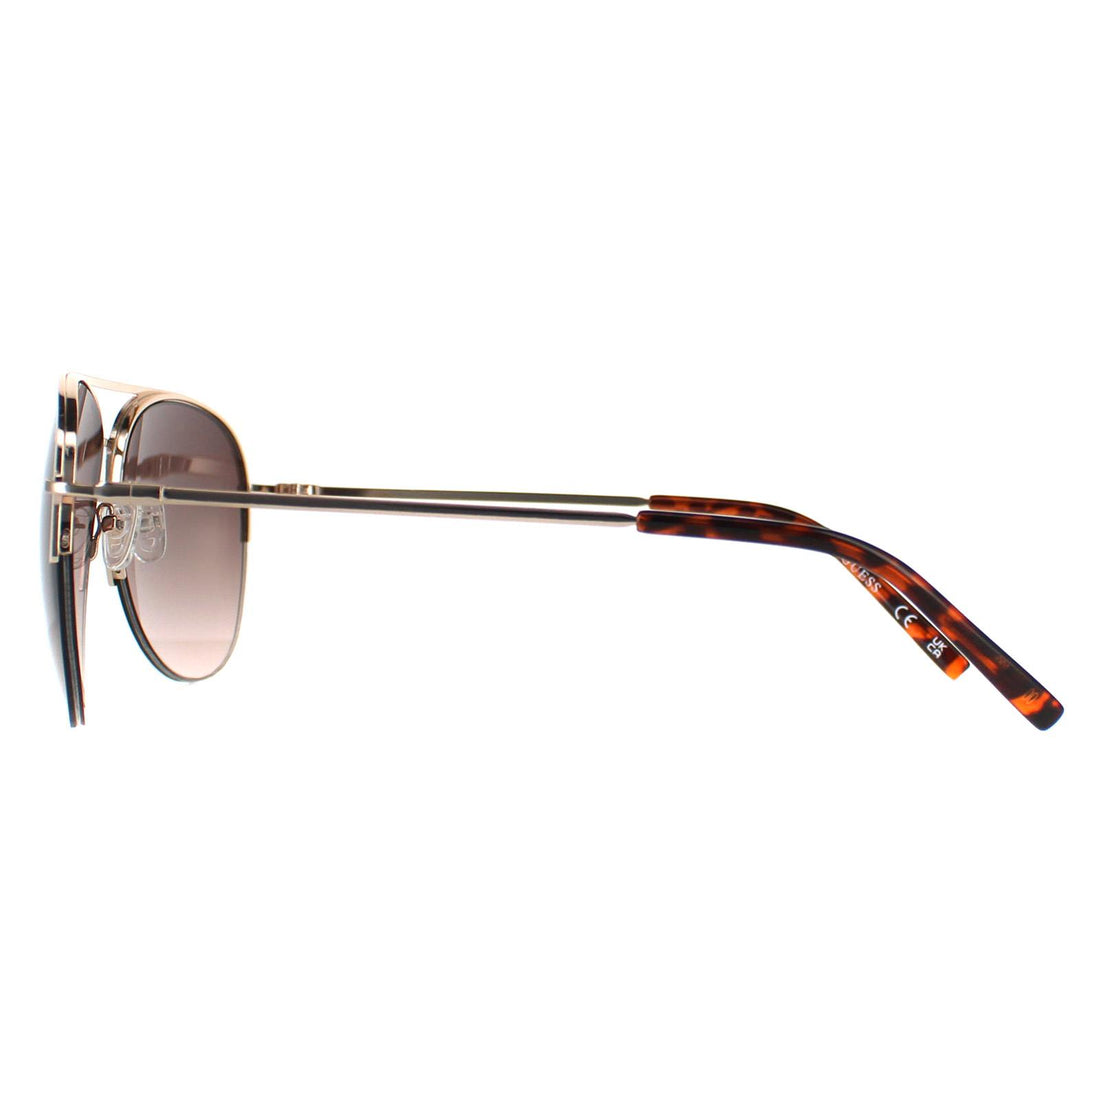 Guess Sunglasses GF0224 32F Gold Brown Gradient